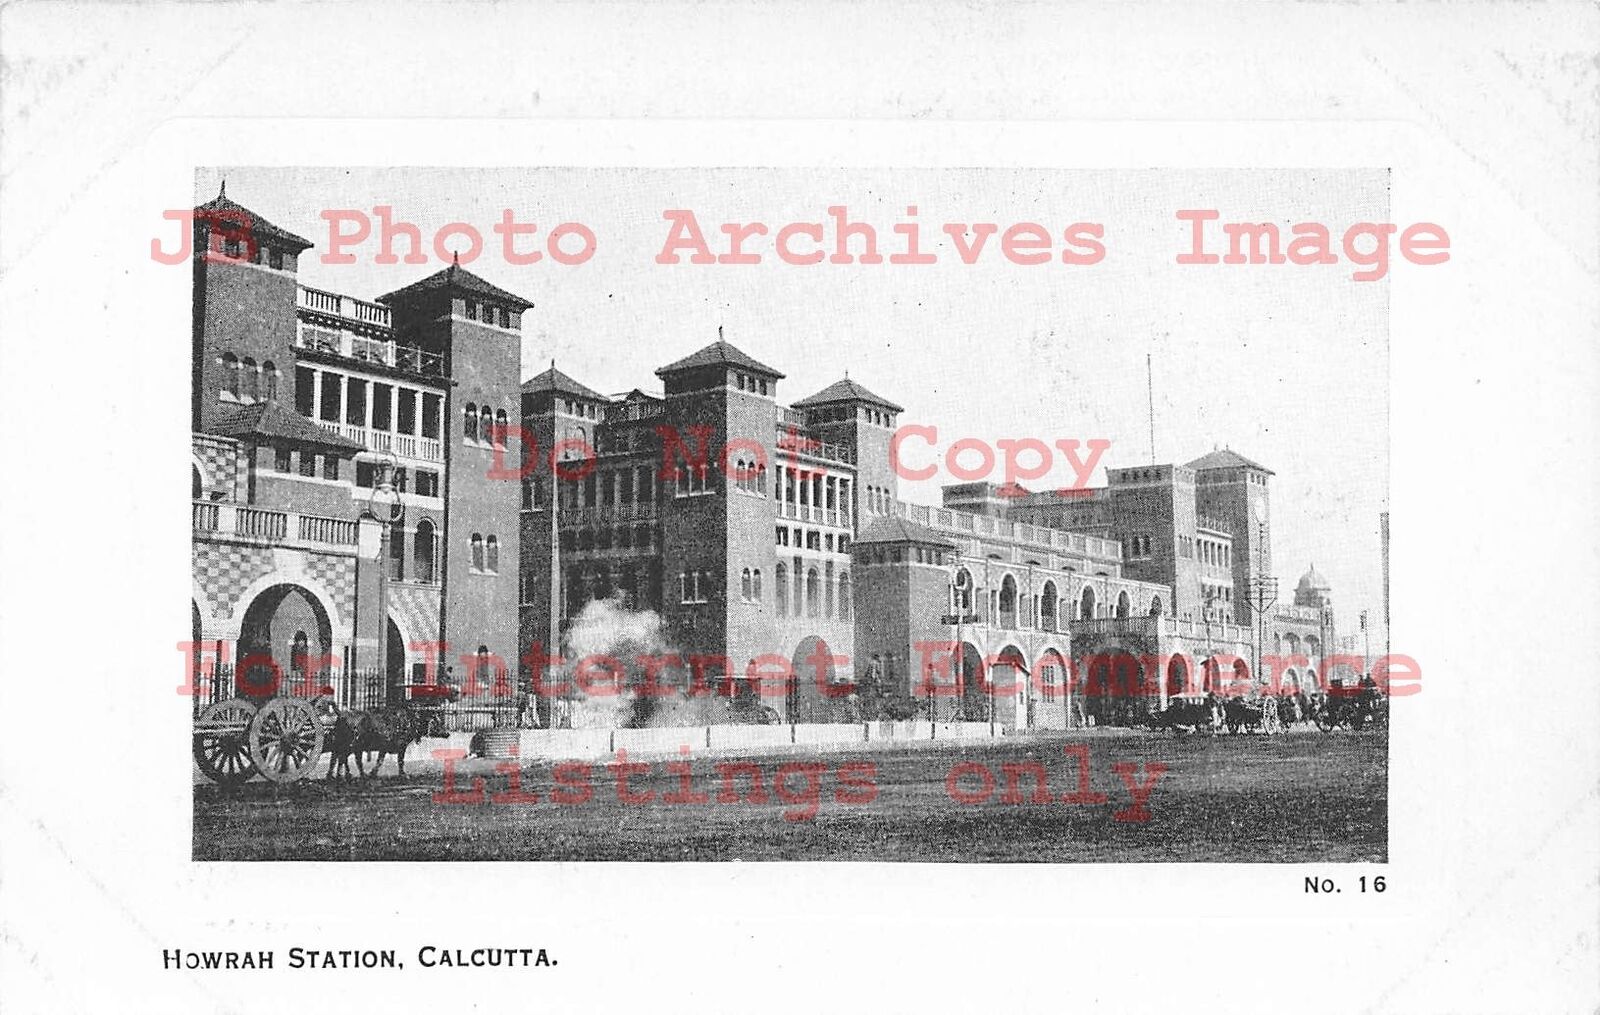 India, Calcutta, Howrah Station, Exterior View, No 16